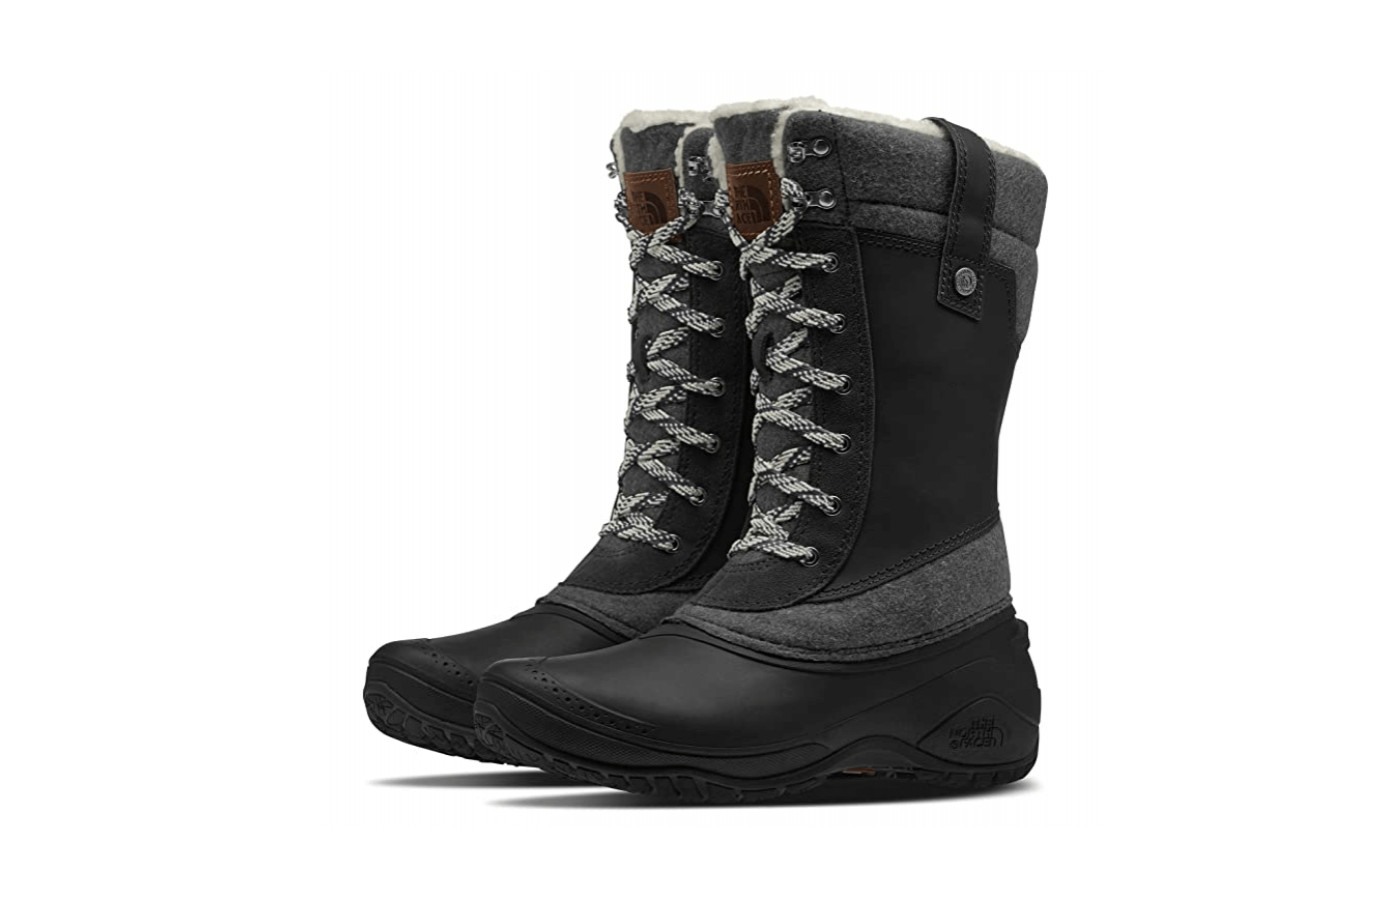 The North Face Shellista IV Snow Boot